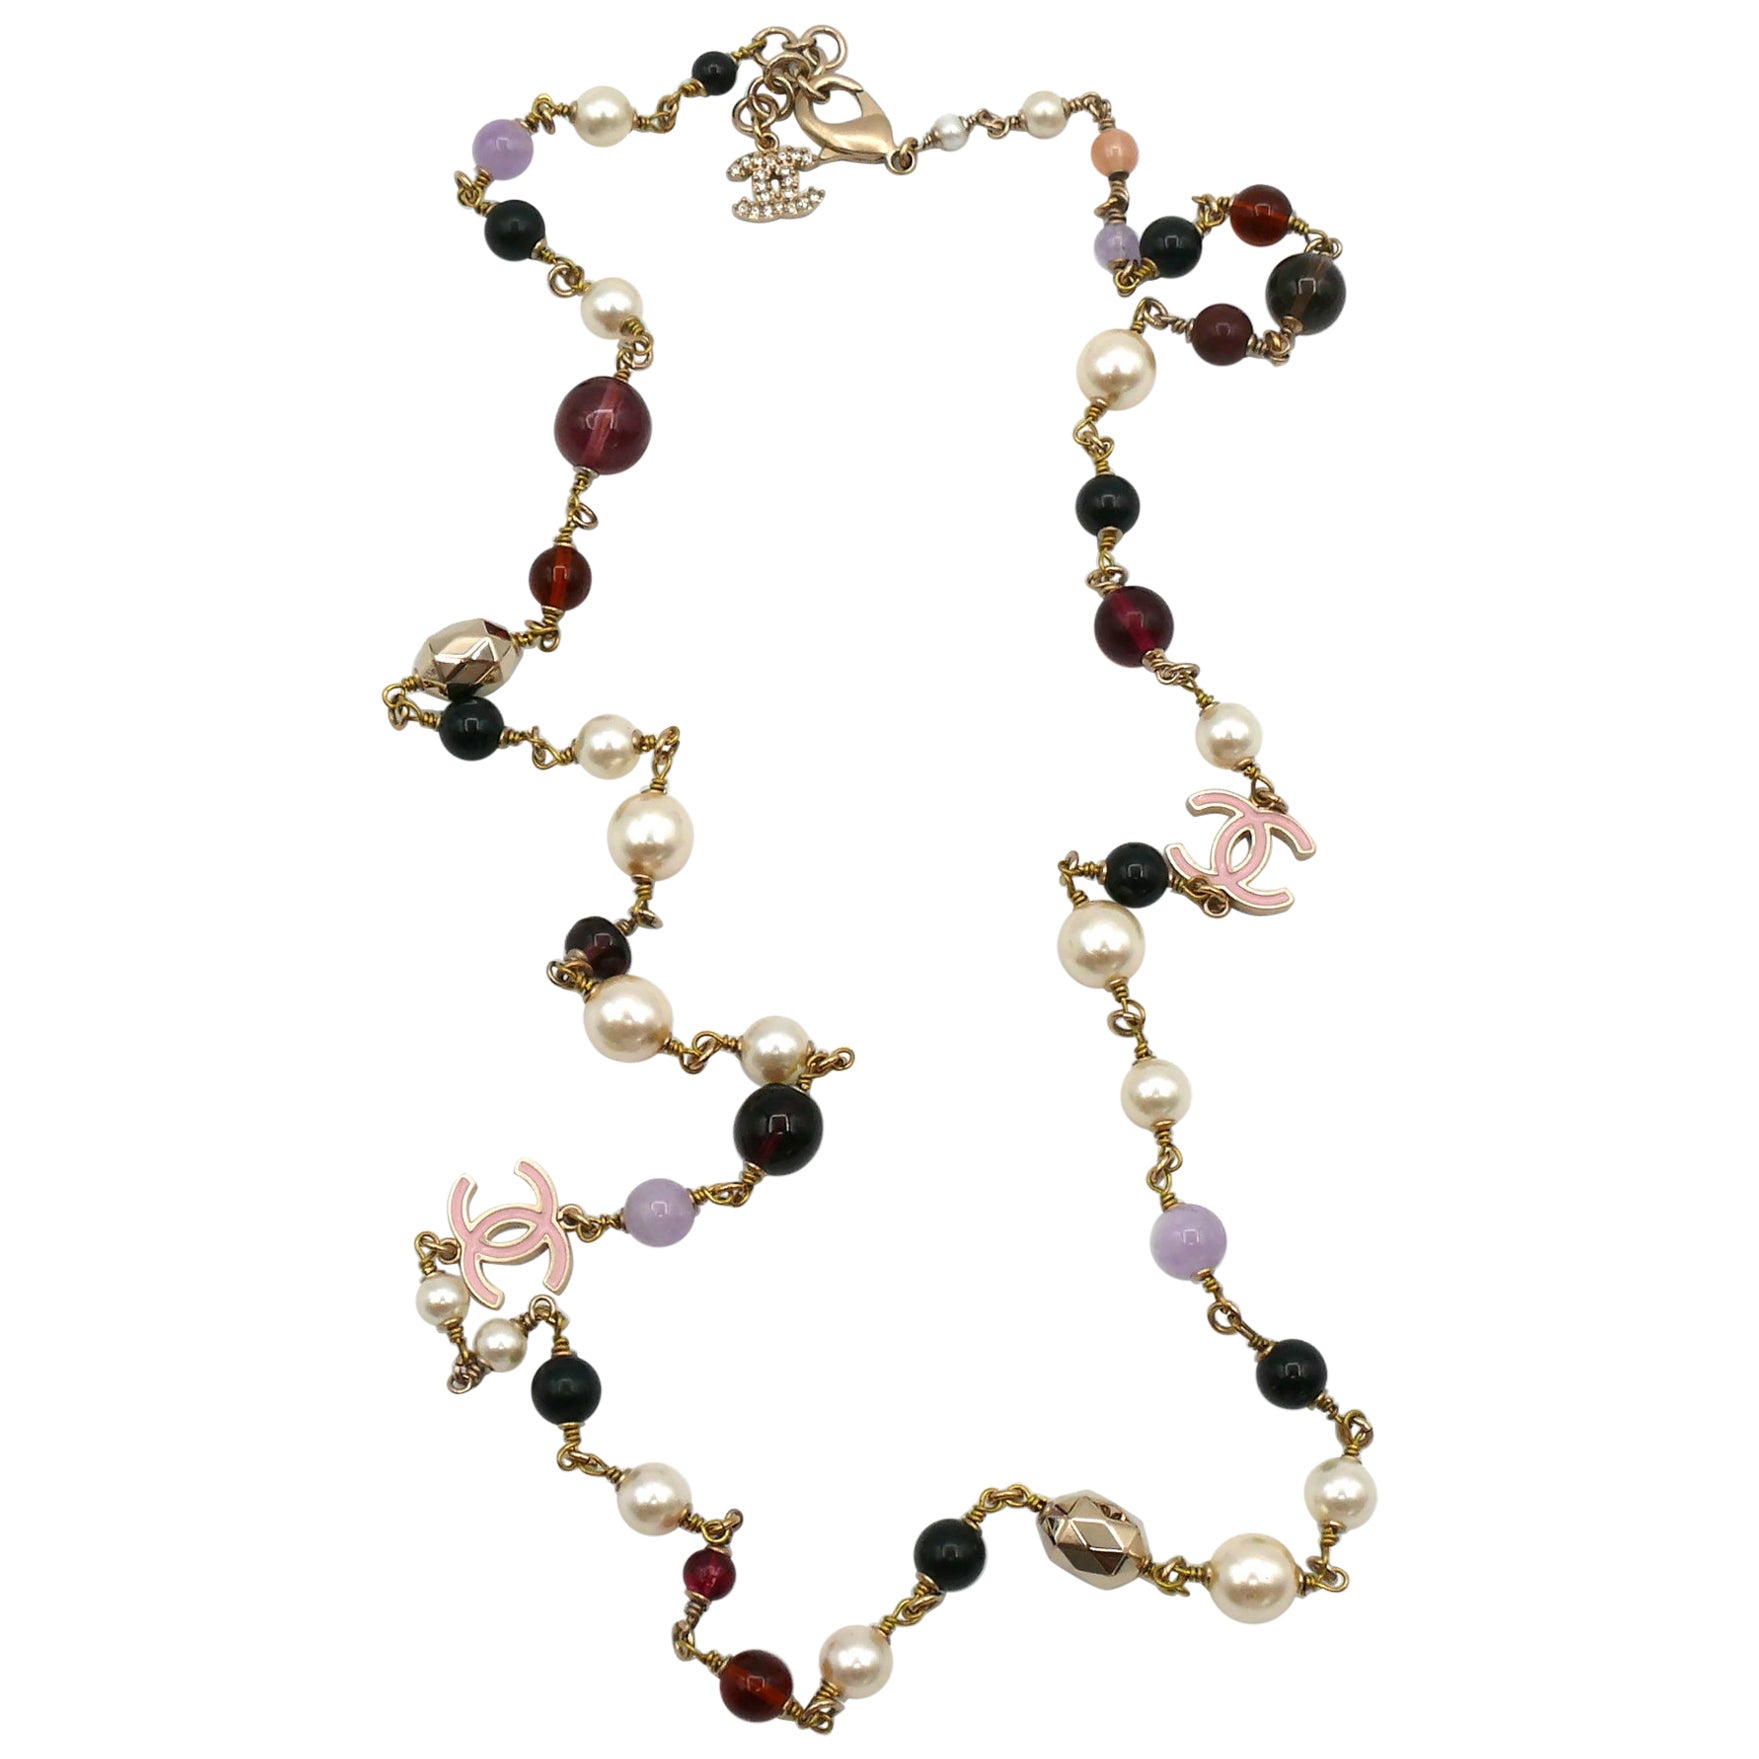 Chanel CC Logos Multicolored Beads and Faux Pearl Necklace, 2017